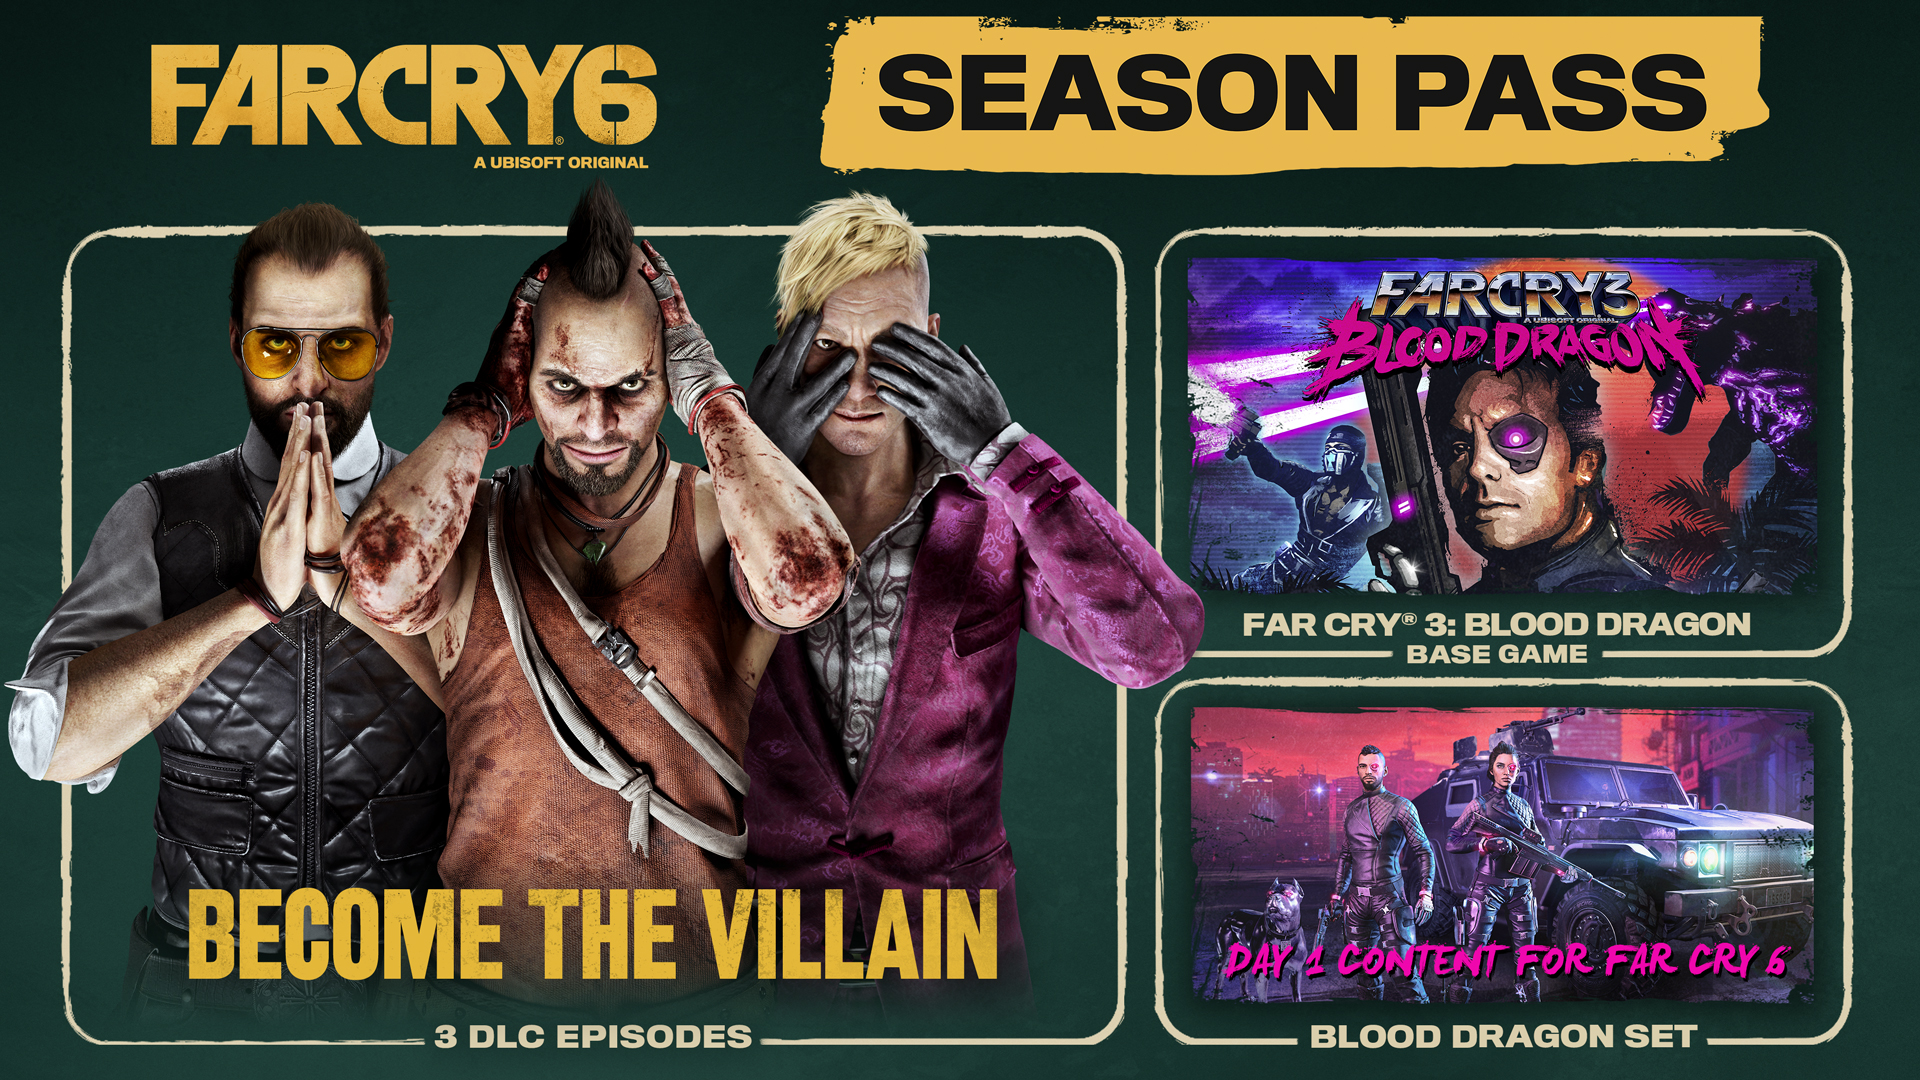 Far Cry 6 missions can be played in almost any order